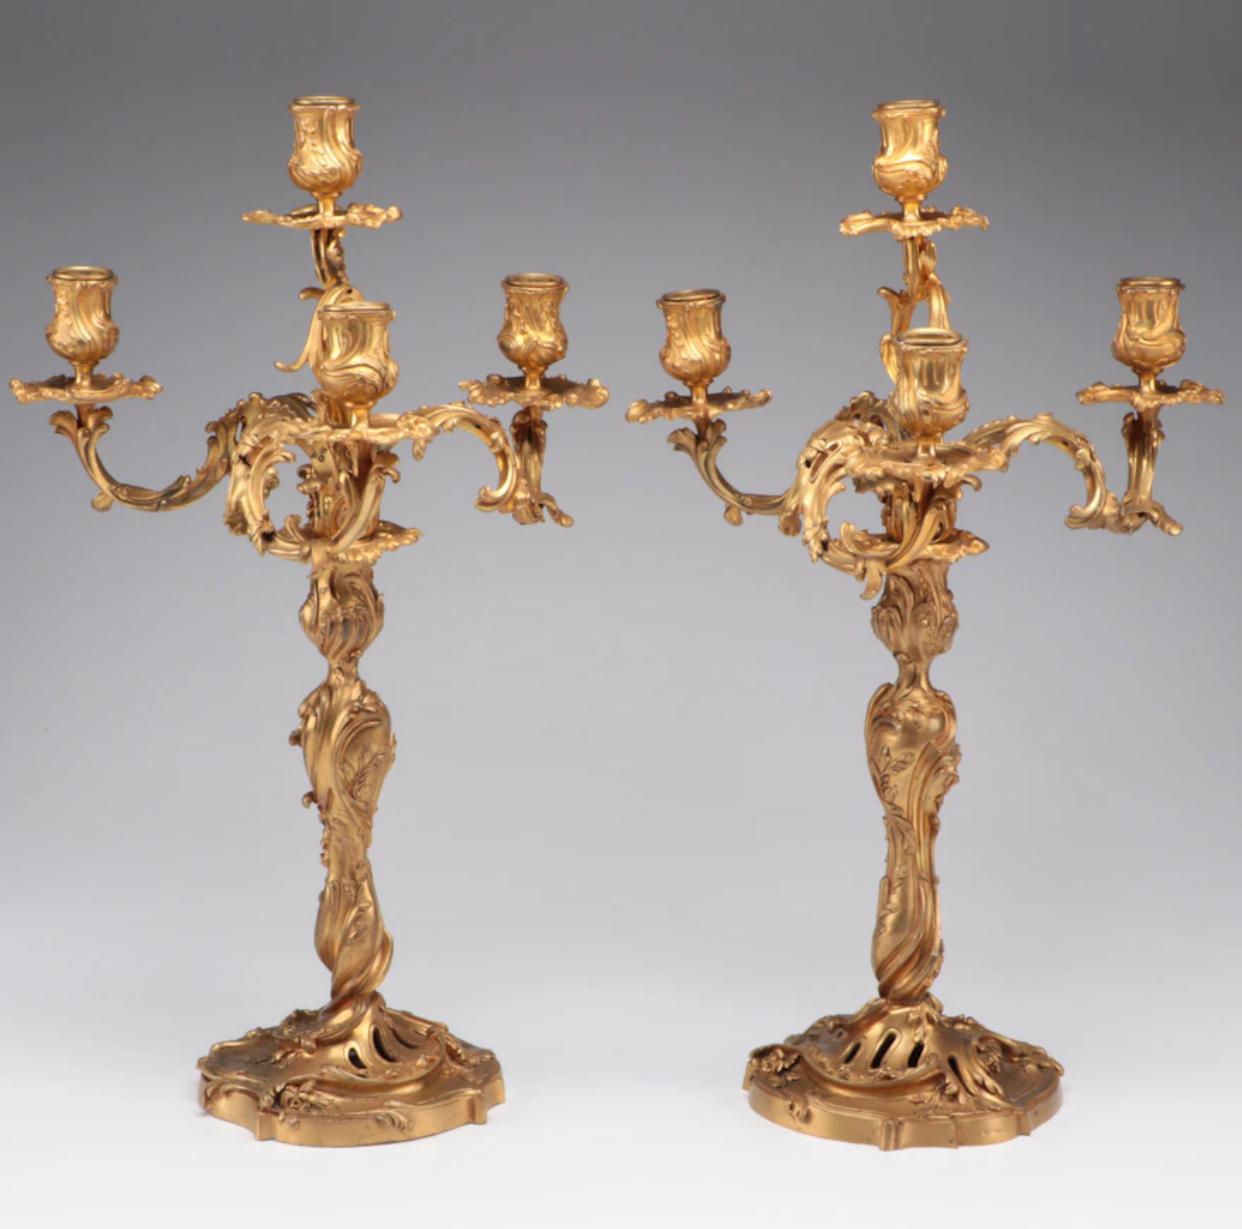 Pair of D’Ore Bronze four light candelabra with incredible acanthus leaf ormolu. Each candle holder is finished with a decorative bobeche. Heavy, and as the name reflects, very well cast. Hallmarks Ravinet D’Enfert. 

The company founded in 1845 by